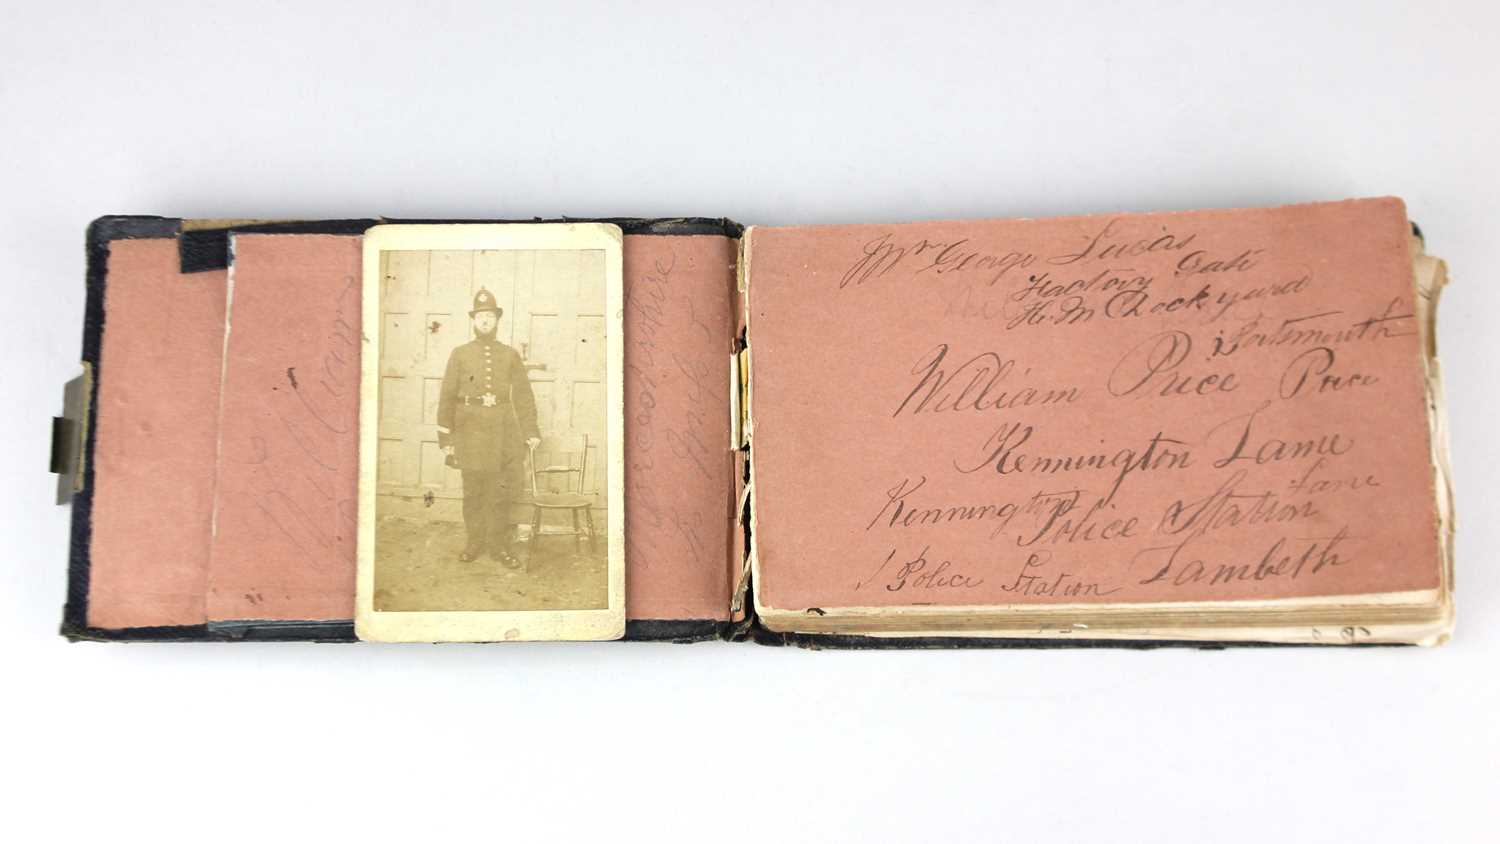 A 19th century Policeman's notebook, front page inscribed 'William Price, Kennington Lane Police